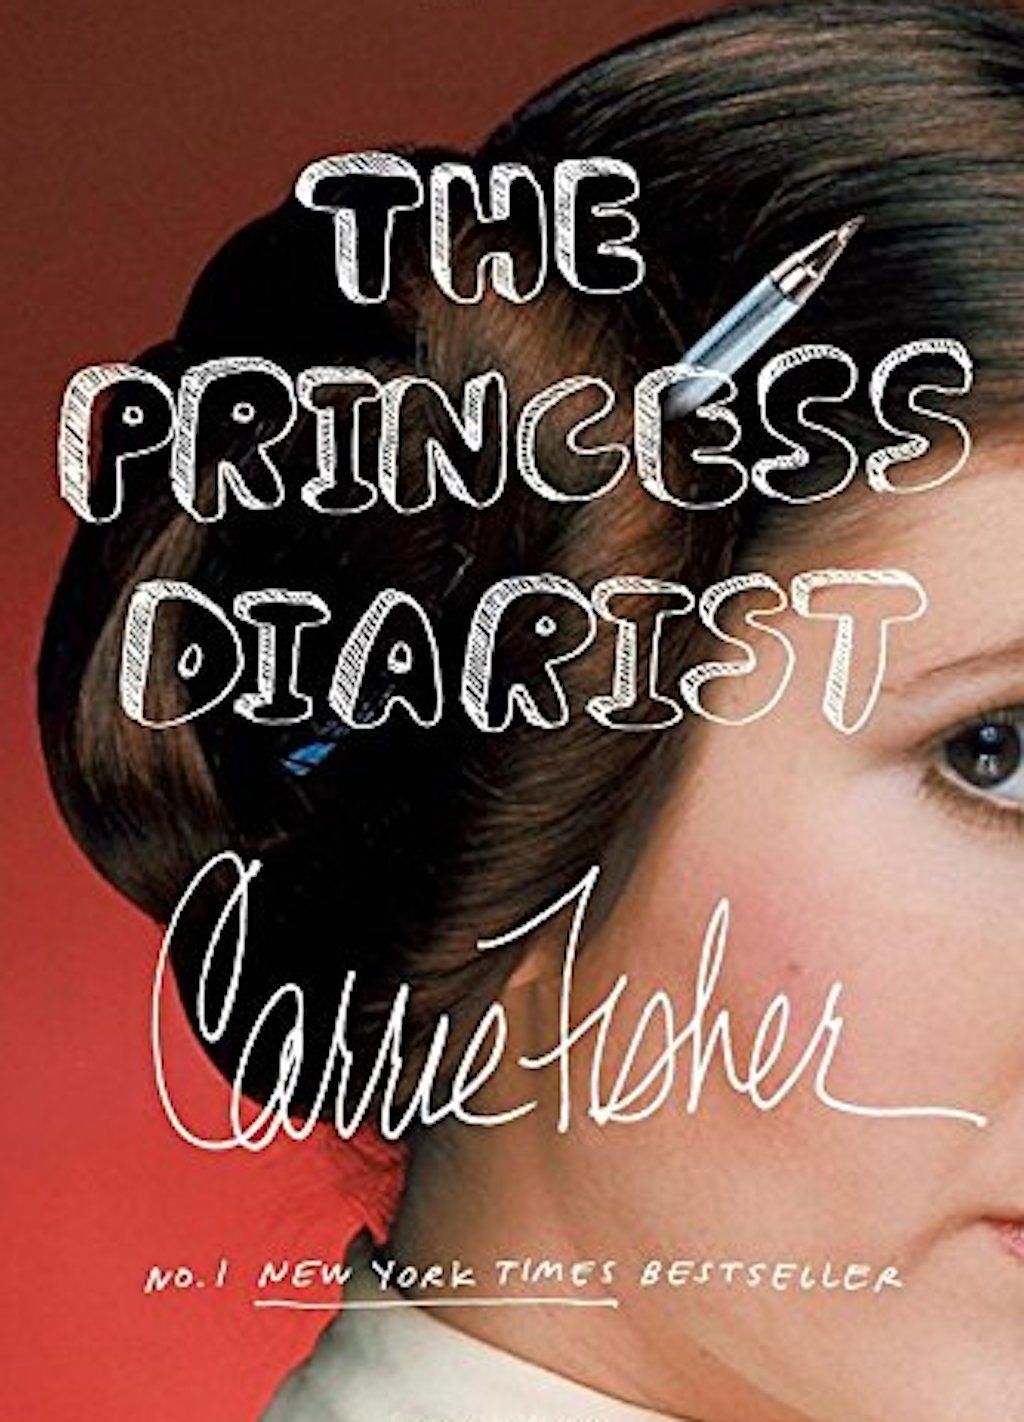 Carrie Fisher grappigste Celebrity Books